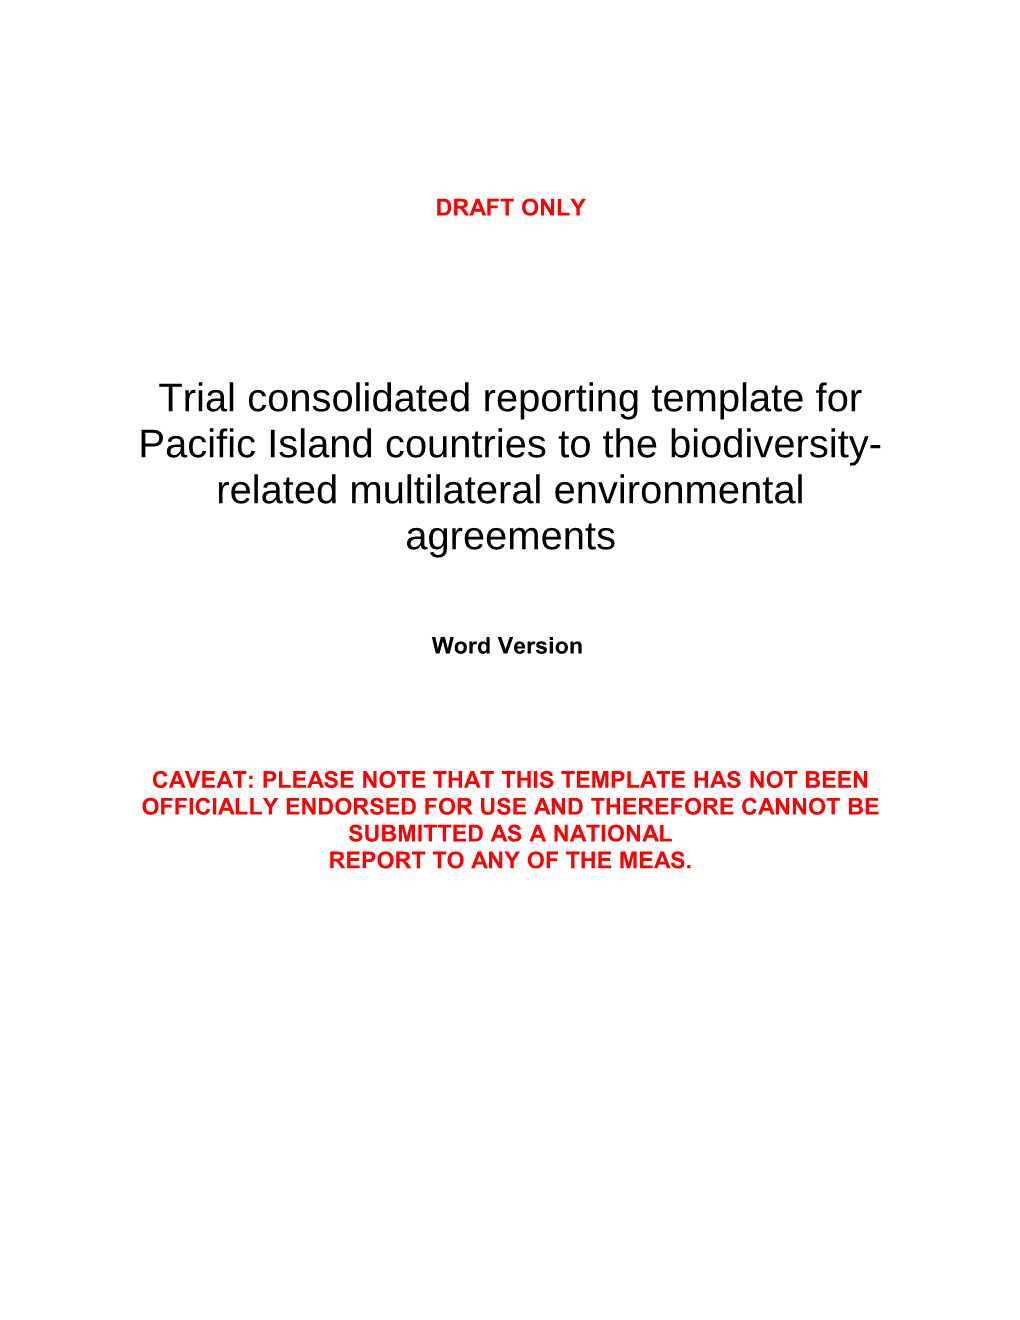 Draft: Trial Consolidated Reporting Template for Pacific Island Countries to The